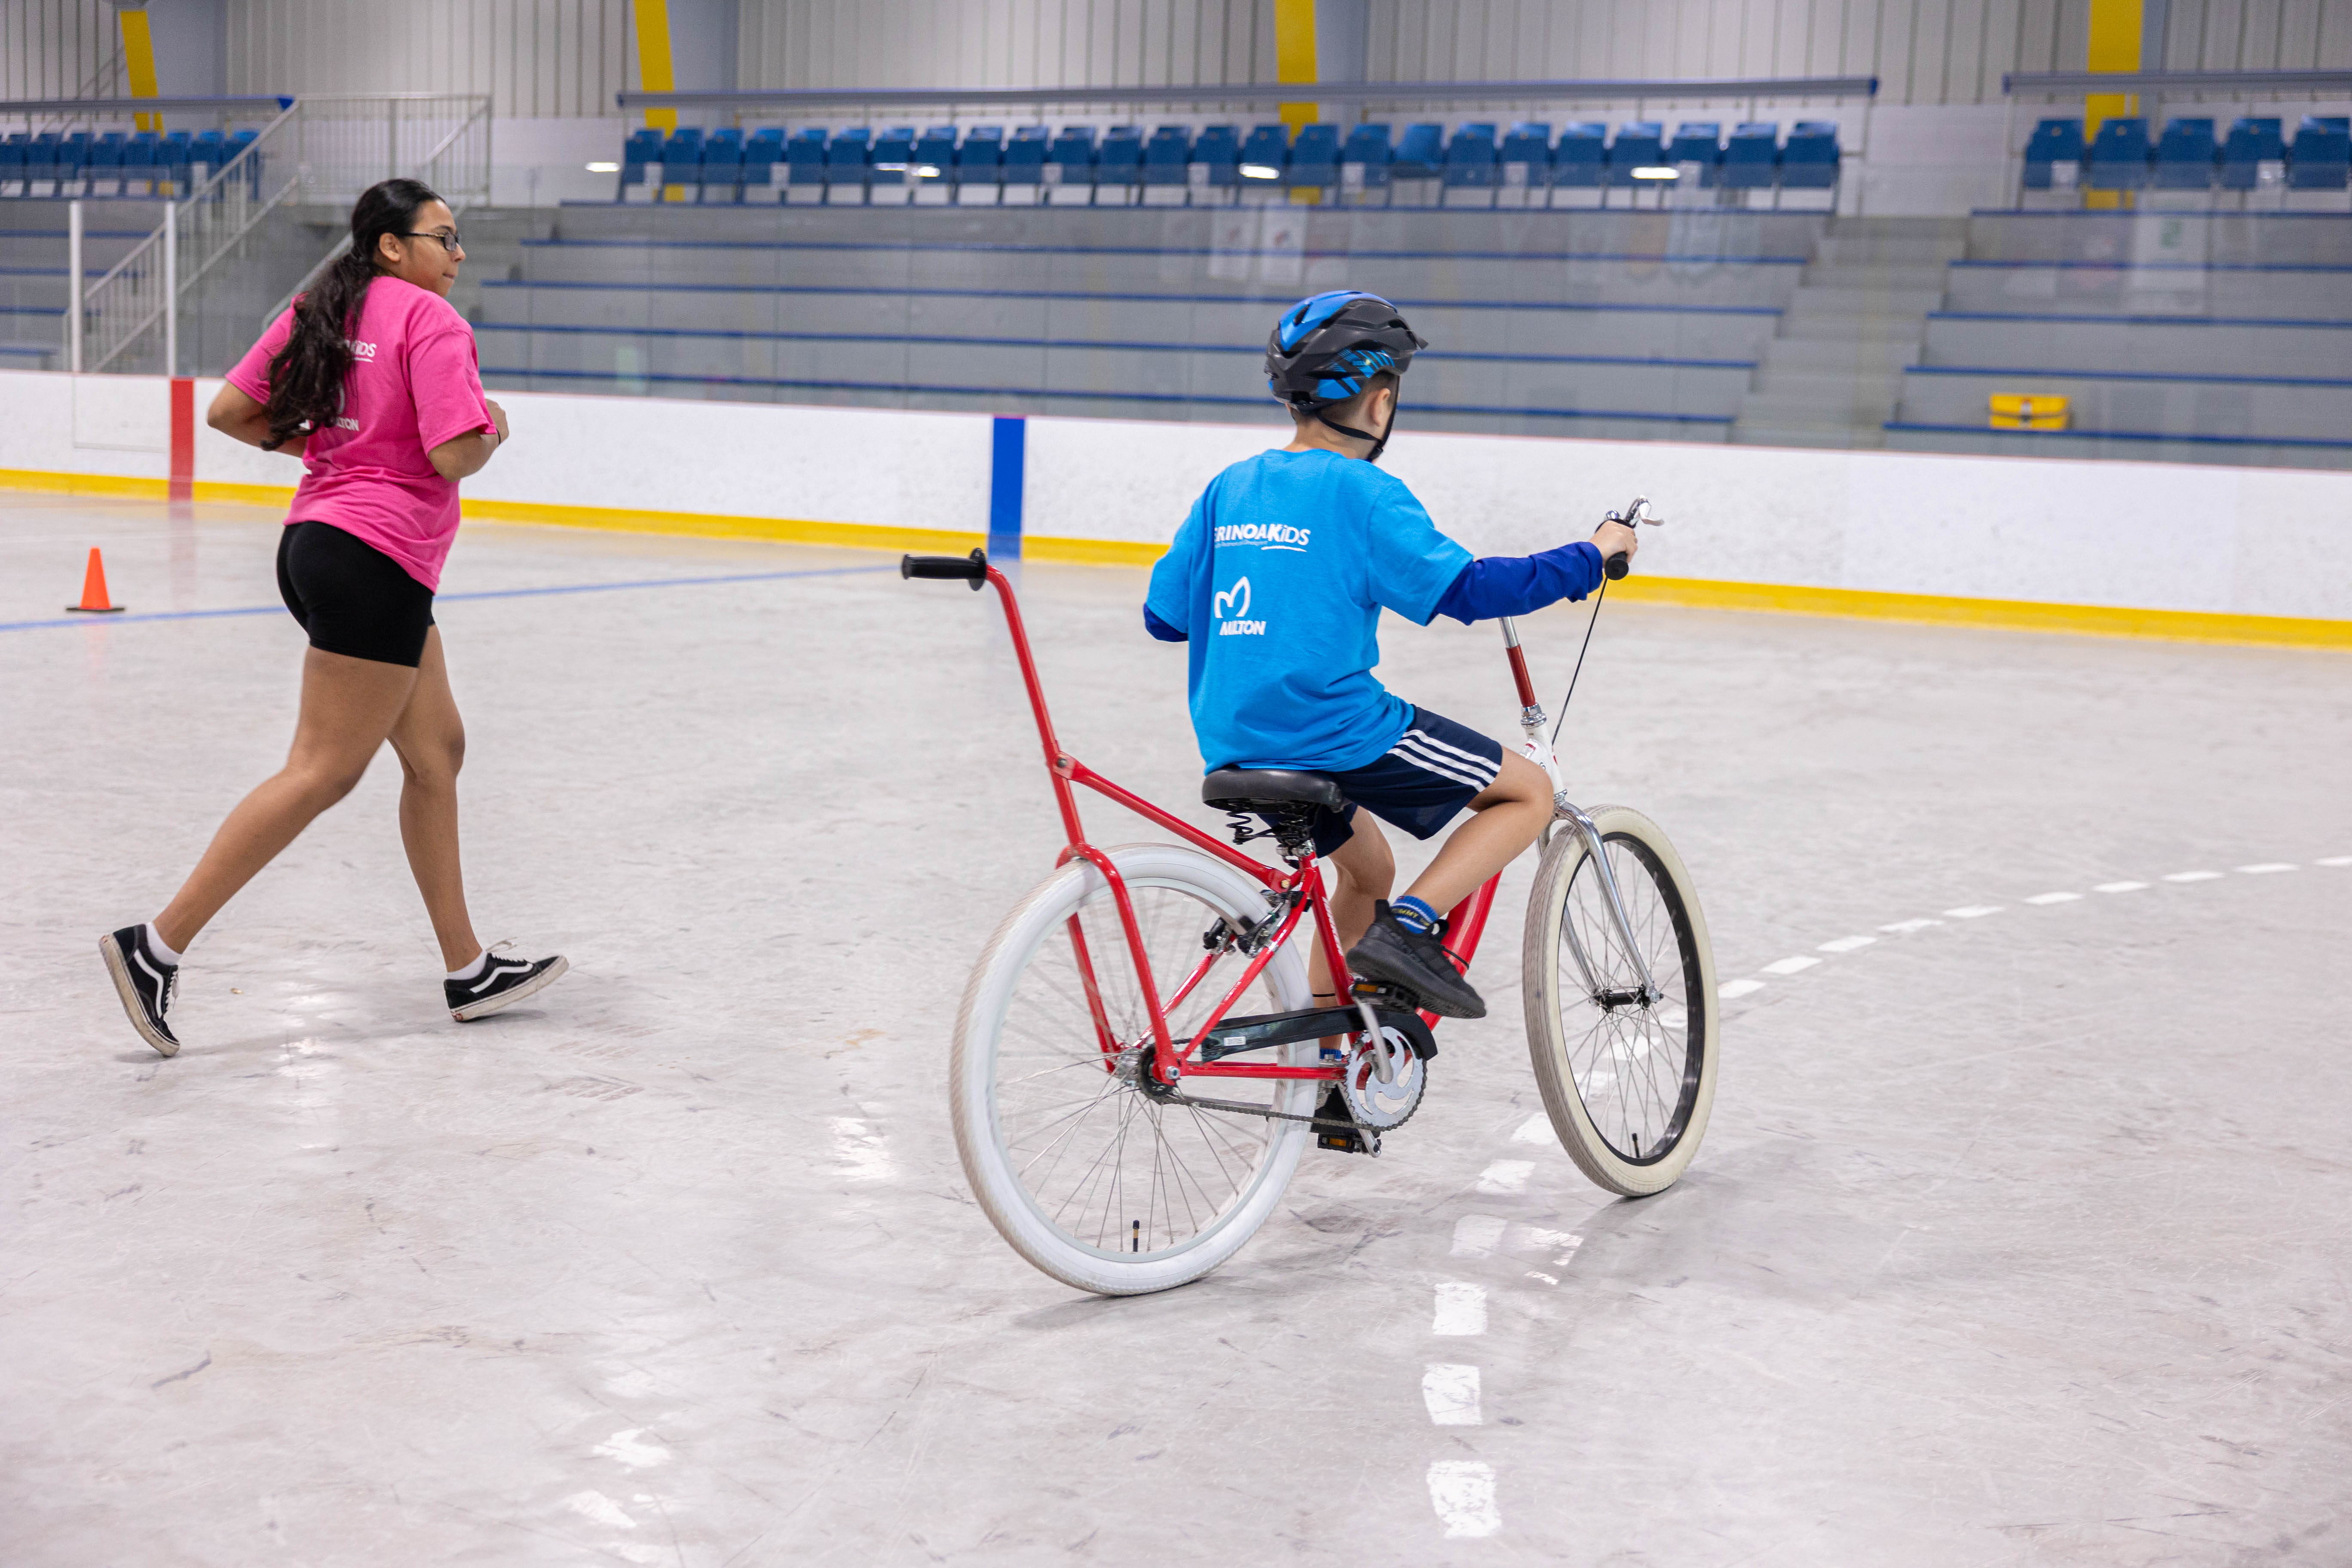 Young people helping children with disabilities to learn to ride a bike